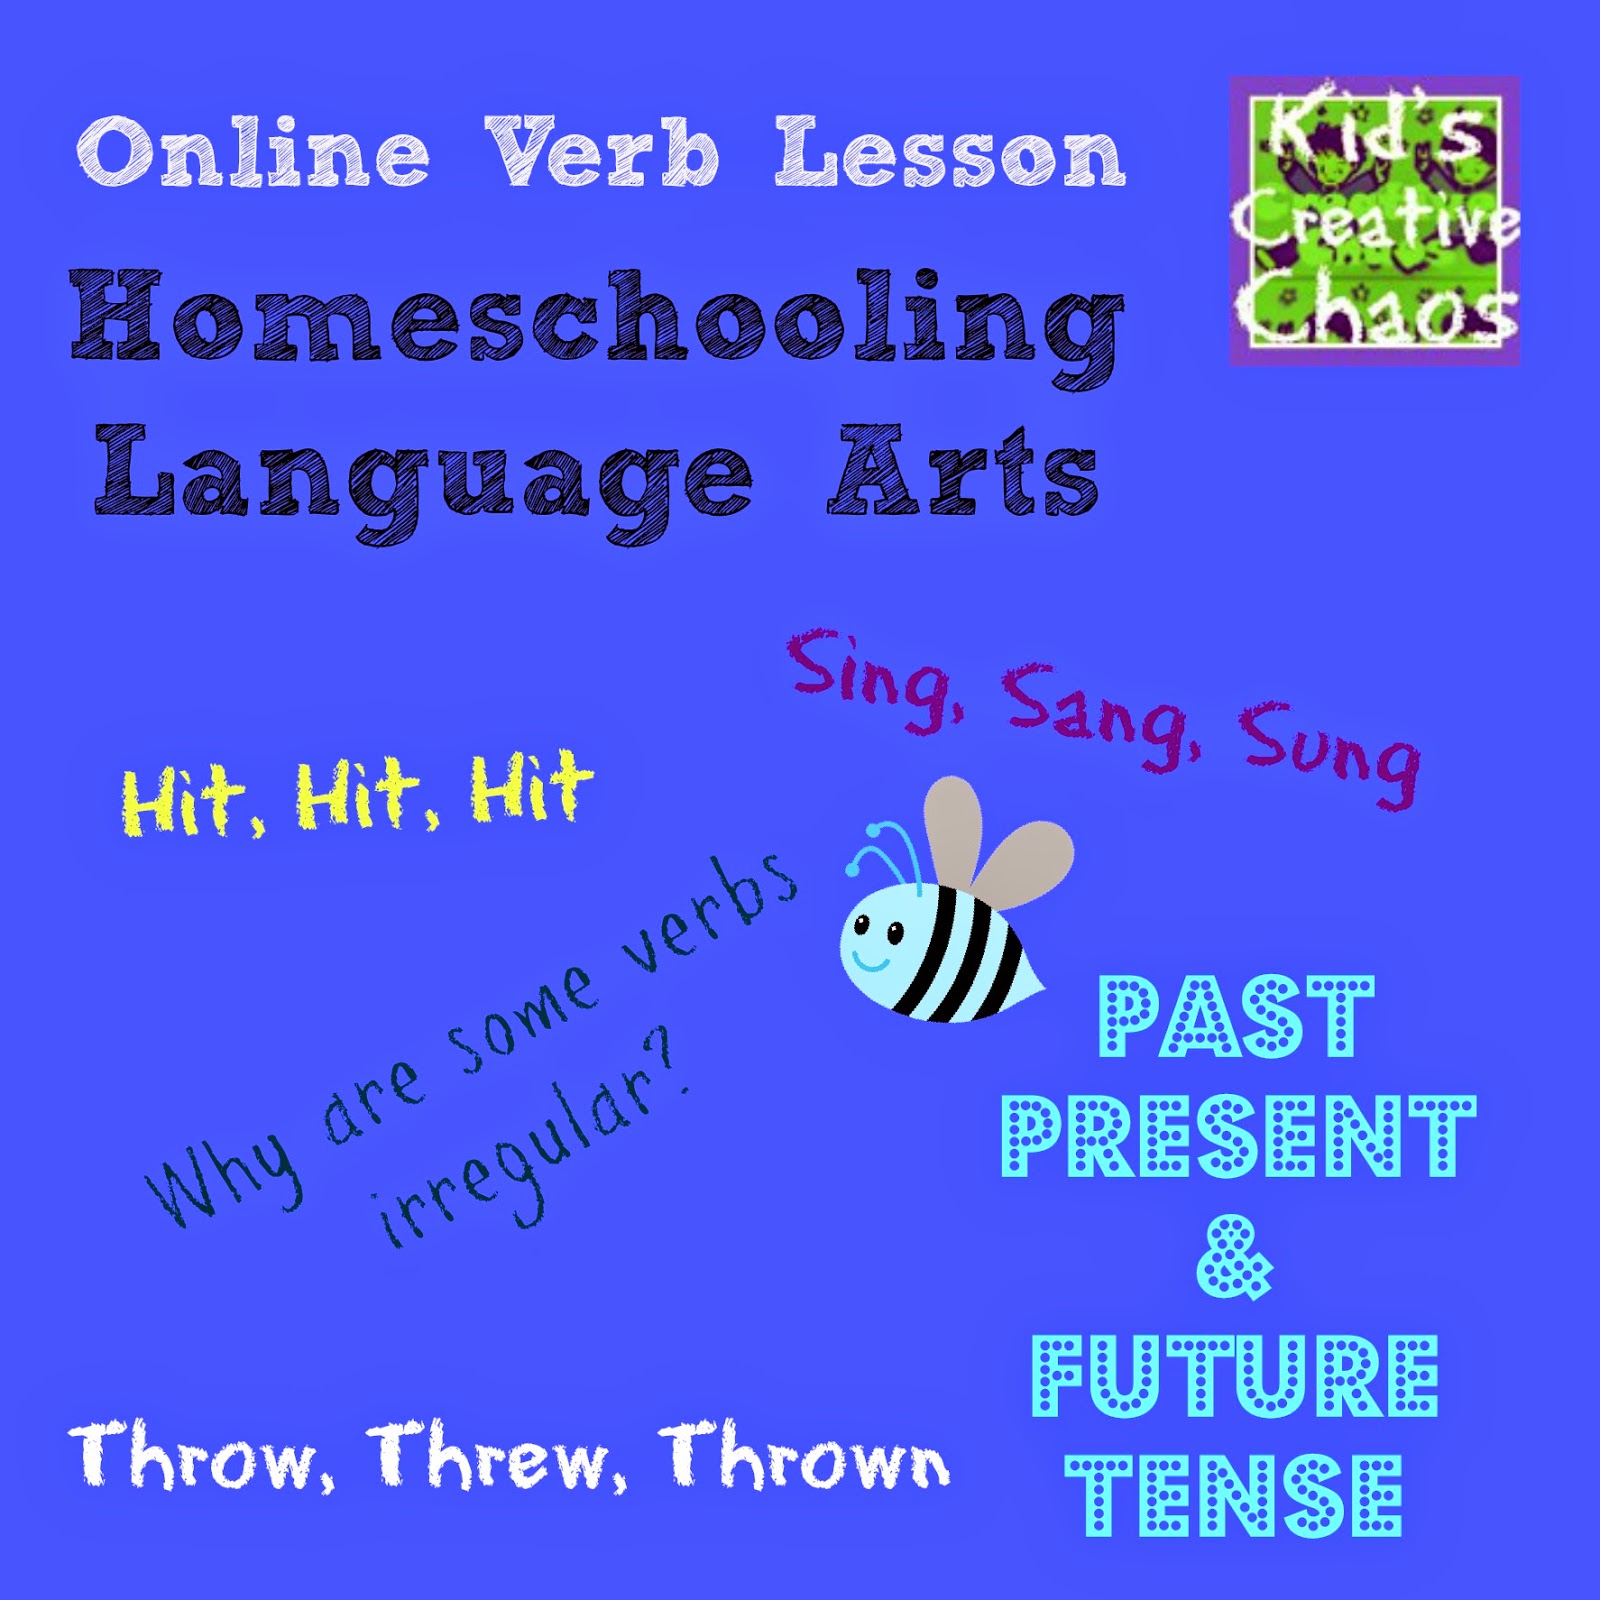 English Verb Conjugation Practice Lesson For Homeschool Adventures Of Kids Creative Chaos